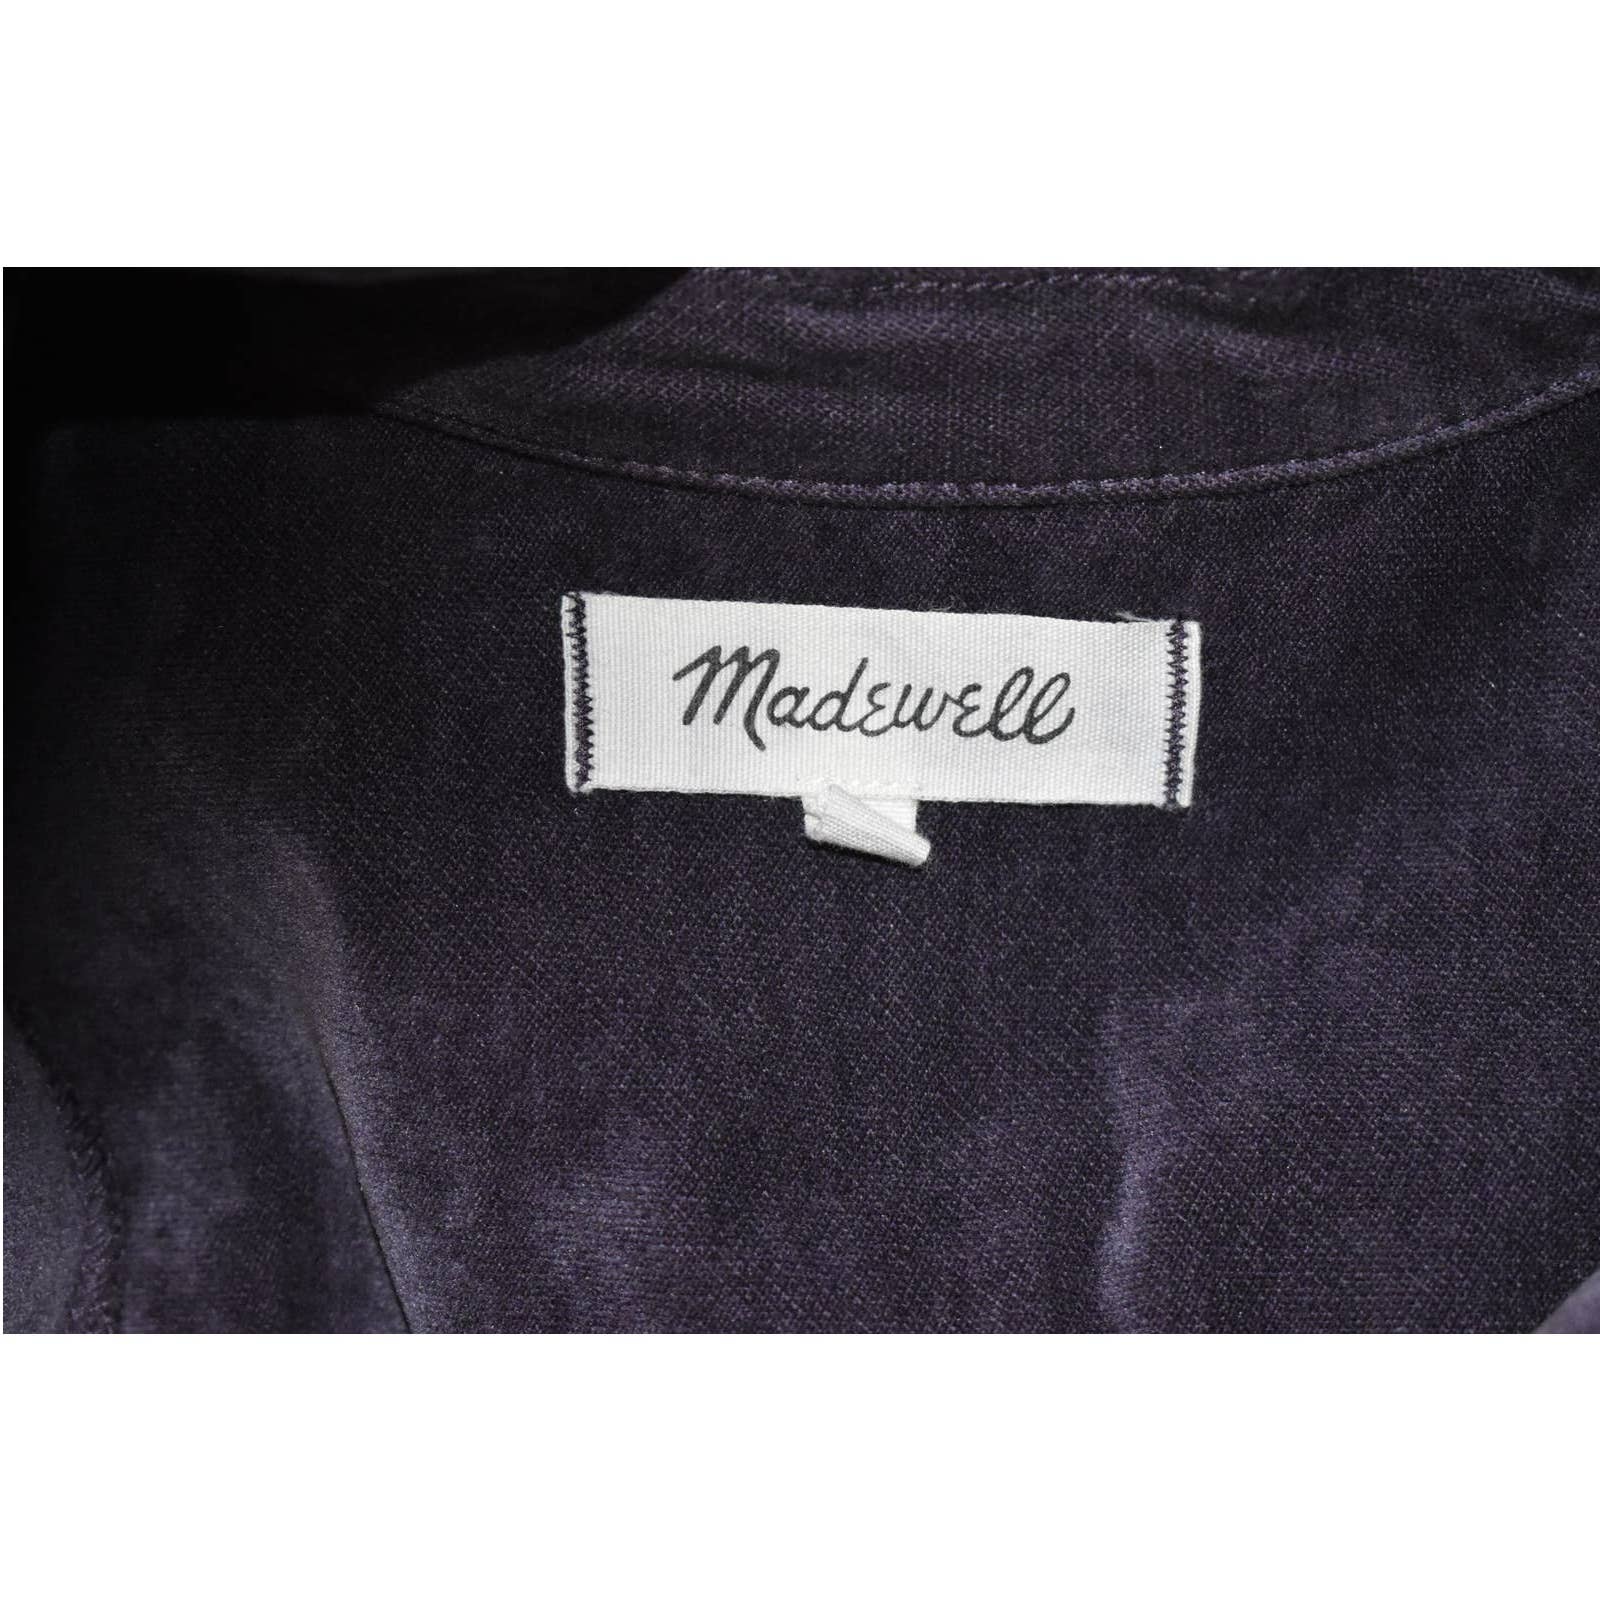 Madewell Grape Purple Velour Button Up Coveralls Jumpers - 0